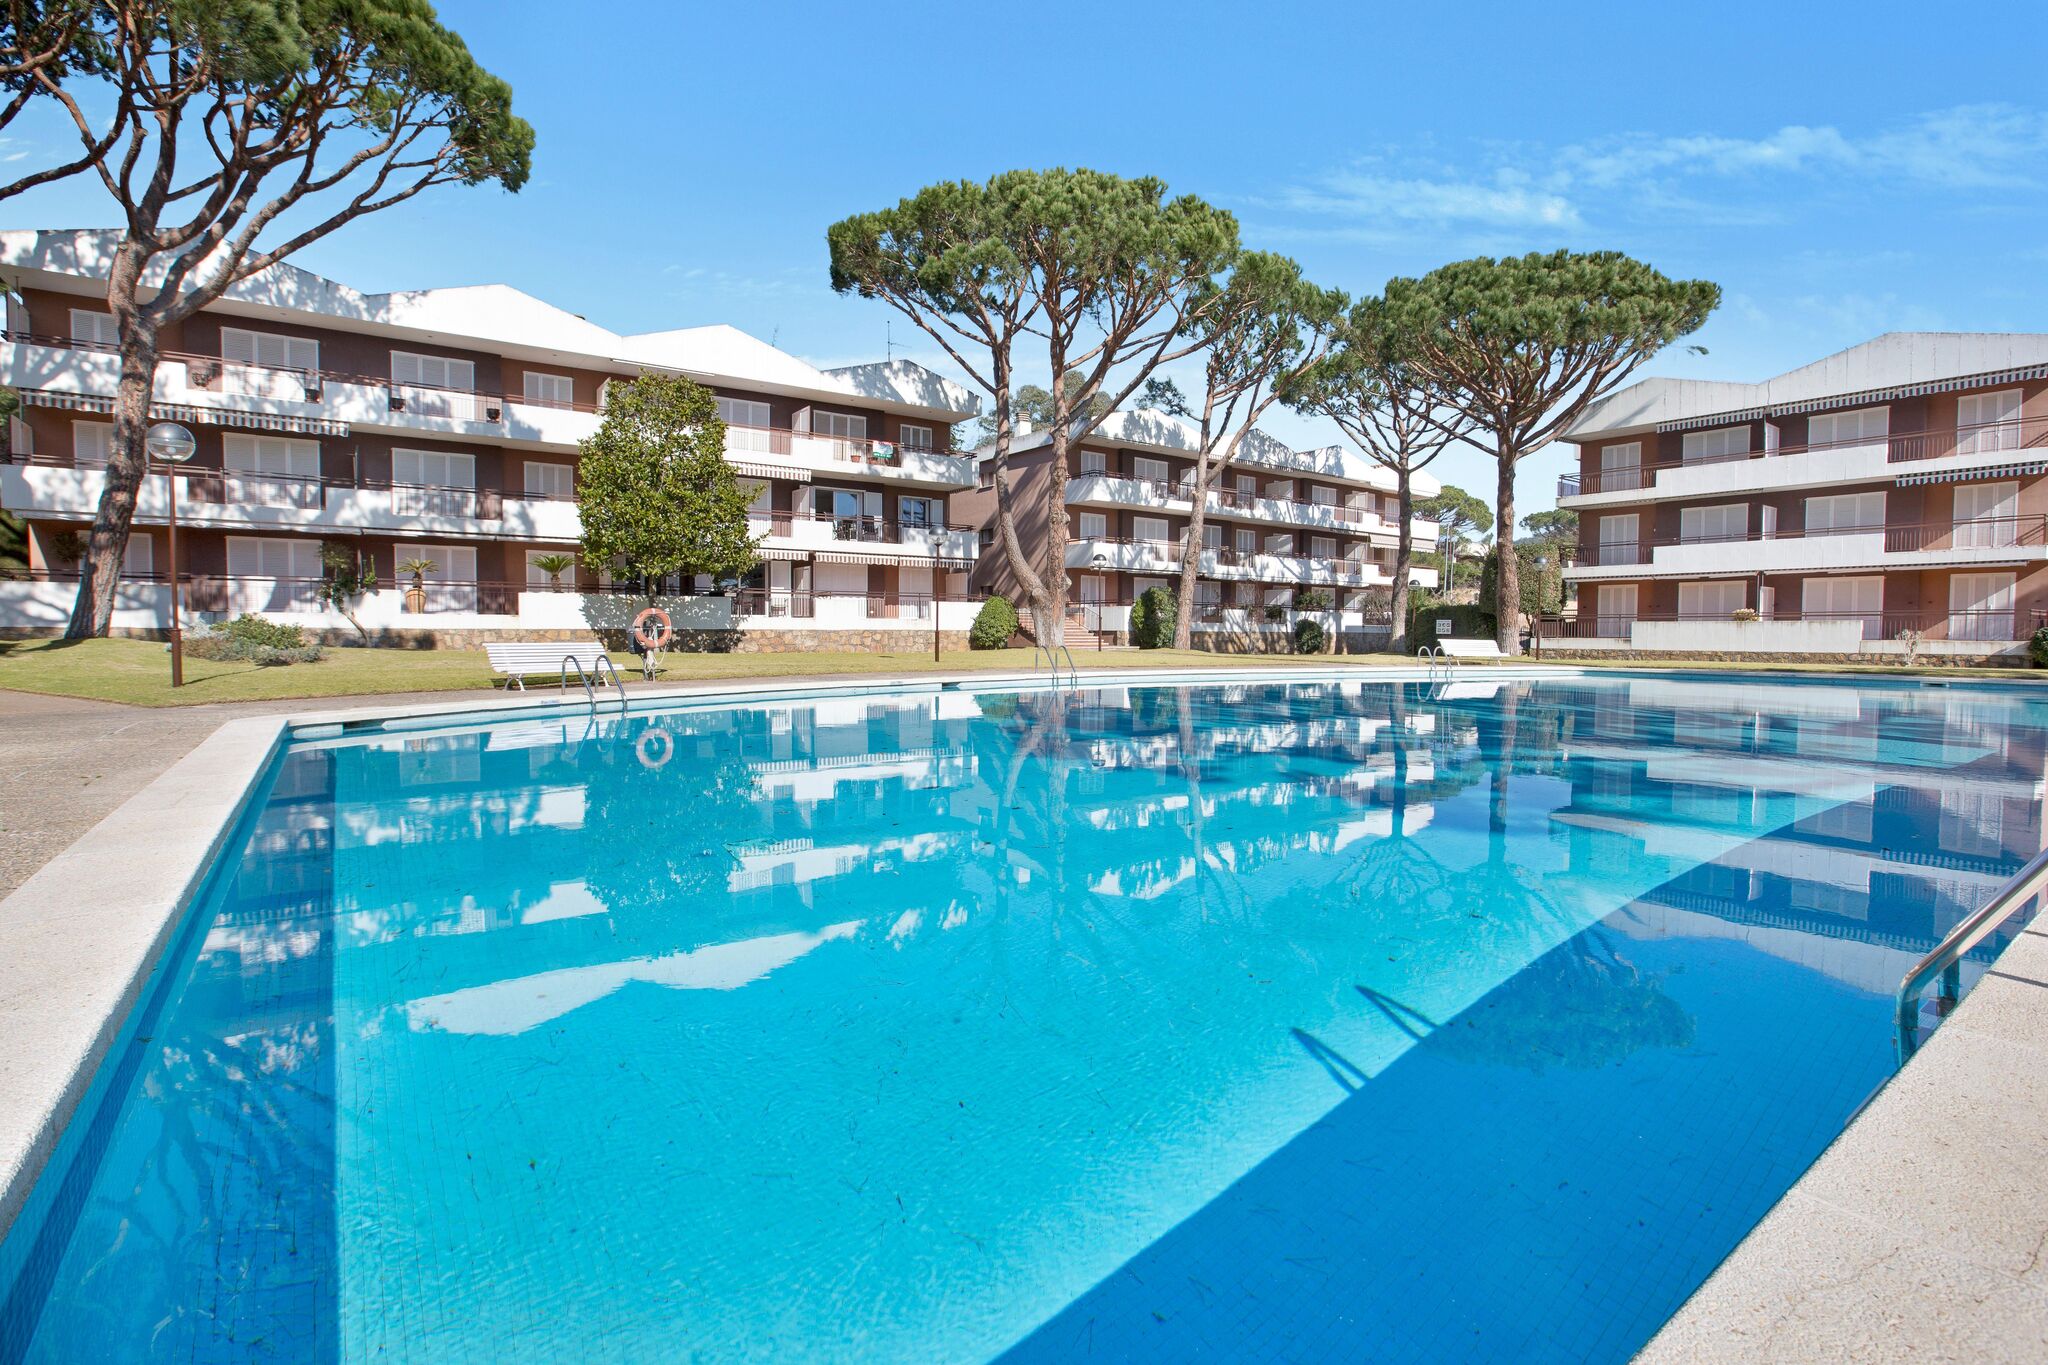 Delightful Apartment in Calella de Palafrugell with Swimming Pool